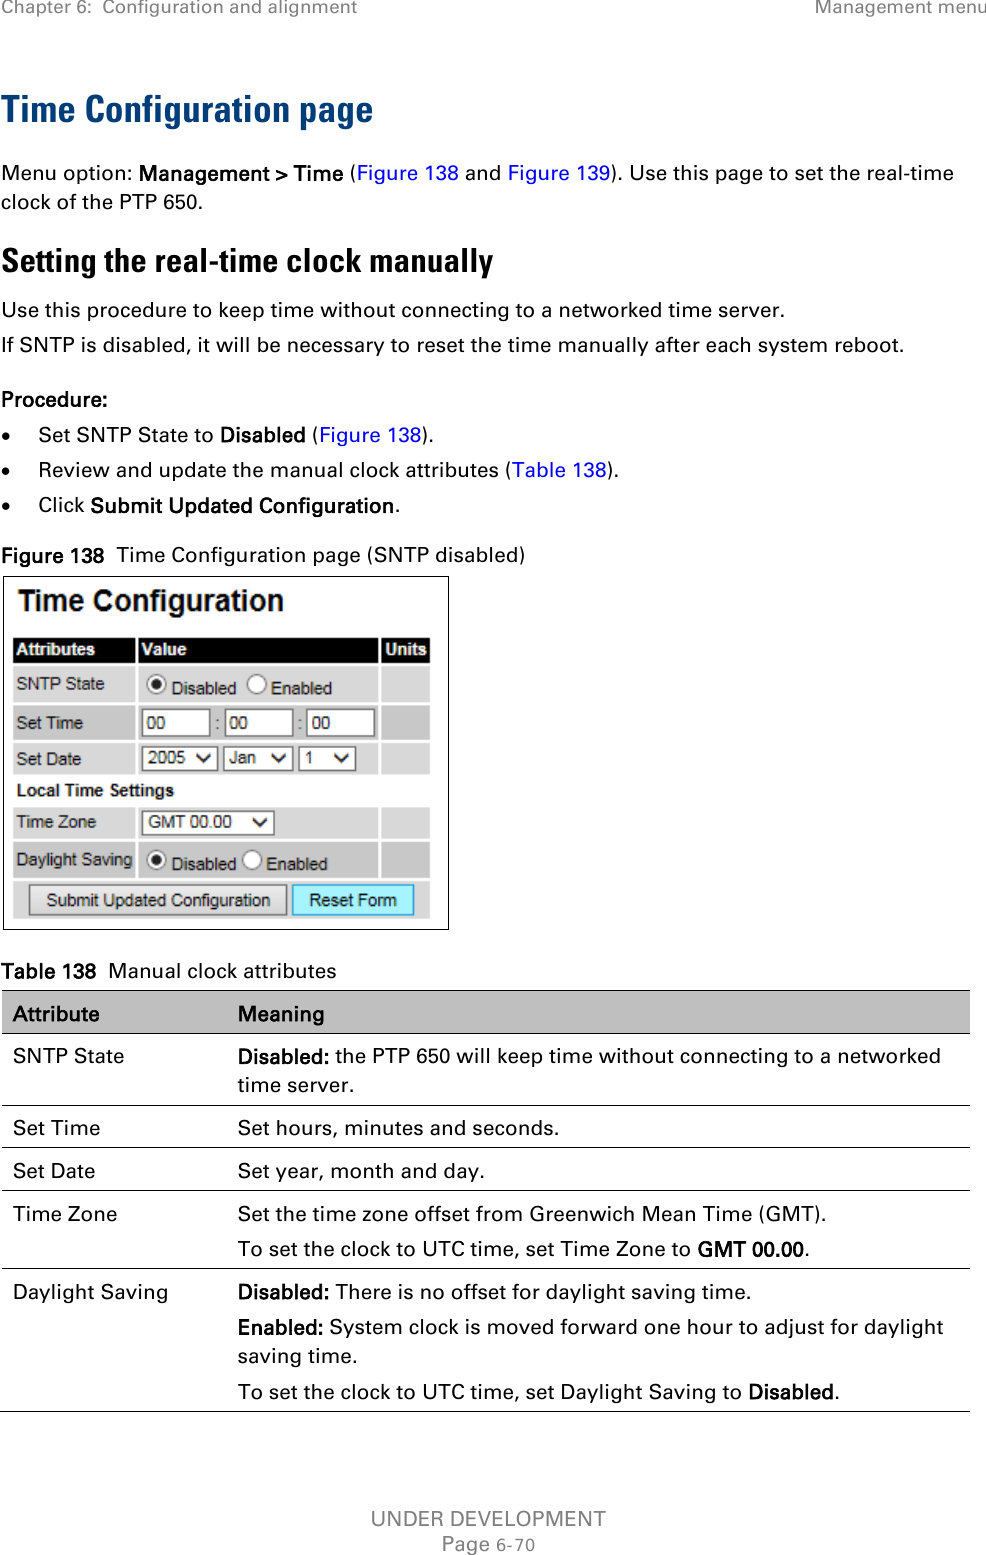 Chapter 6:  Configuration and alignment Management menu  Time Configuration page Menu option: Management &gt; Time (Figure 138 and Figure 139). Use this page to set the real-time clock of the PTP 650. Setting the real-time clock manually Use this procedure to keep time without connecting to a networked time server. If SNTP is disabled, it will be necessary to reset the time manually after each system reboot. Procedure: • Set SNTP State to Disabled (Figure 138). • Review and update the manual clock attributes (Table 138). • Click Submit Updated Configuration. Figure 138  Time Configuration page (SNTP disabled)  Table 138  Manual clock attributes Attribute Meaning SNTP State Disabled: the PTP 650 will keep time without connecting to a networked time server. Set Time Set hours, minutes and seconds. Set Date Set year, month and day. Time Zone Set the time zone offset from Greenwich Mean Time (GMT). To set the clock to UTC time, set Time Zone to GMT 00.00. Daylight Saving Disabled: There is no offset for daylight saving time. Enabled: System clock is moved forward one hour to adjust for daylight saving time. To set the clock to UTC time, set Daylight Saving to Disabled. UNDER DEVELOPMENT Page 6-70 